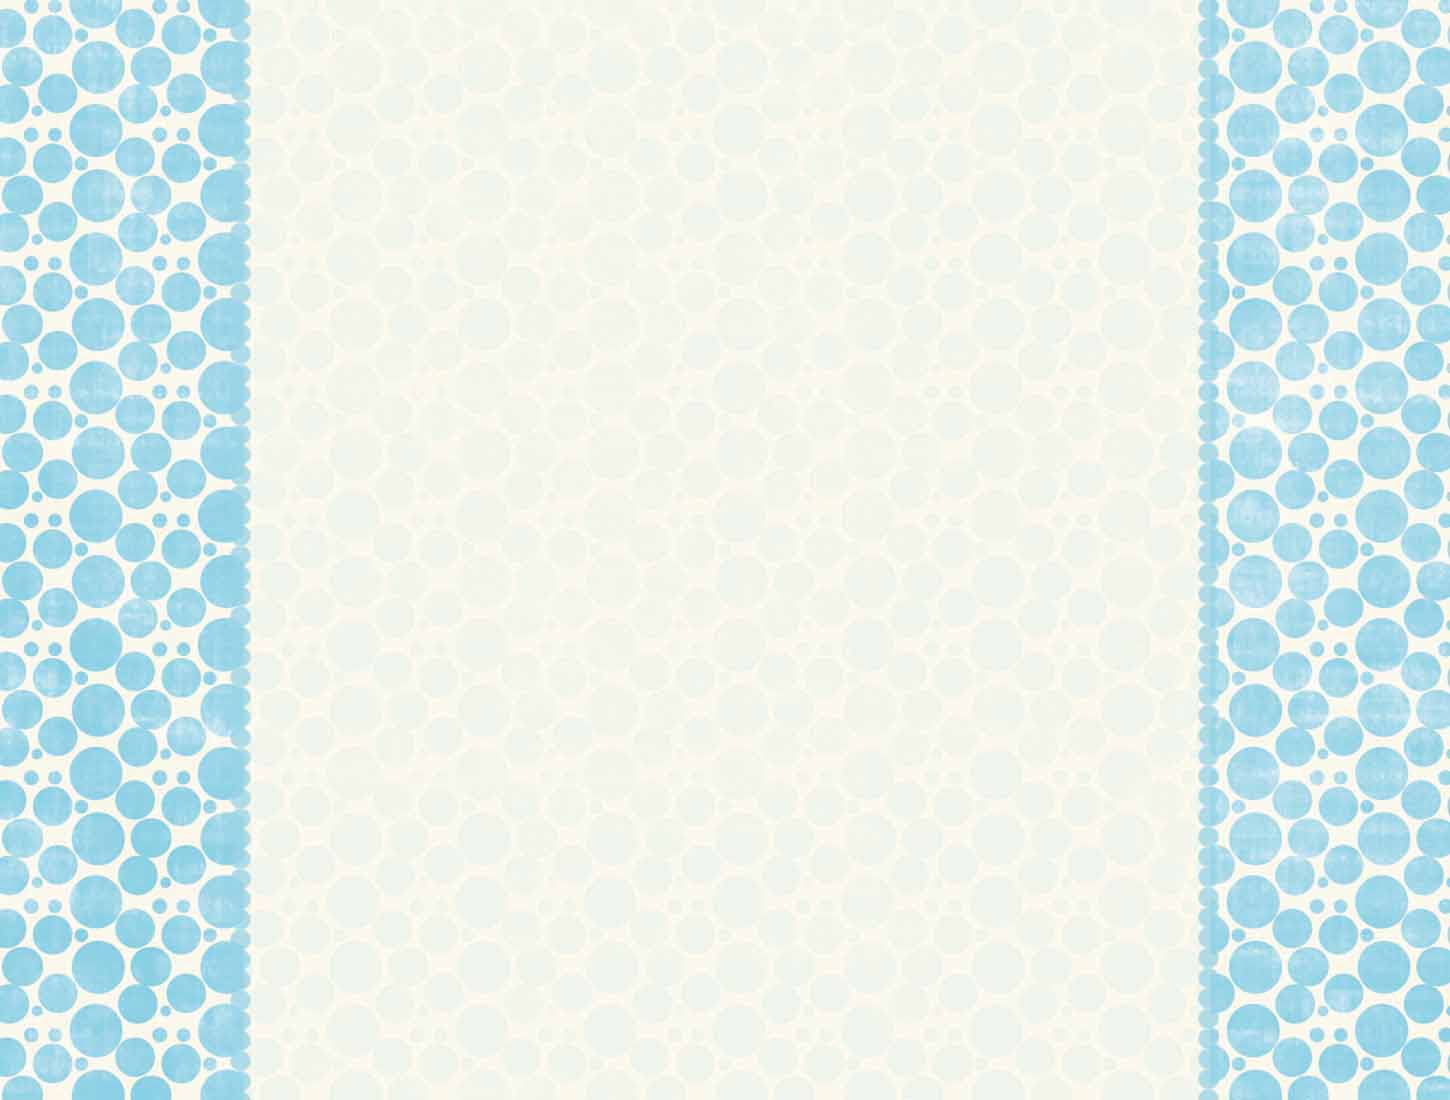 Background Fairy Sweet Blue Distressed Polka Dots